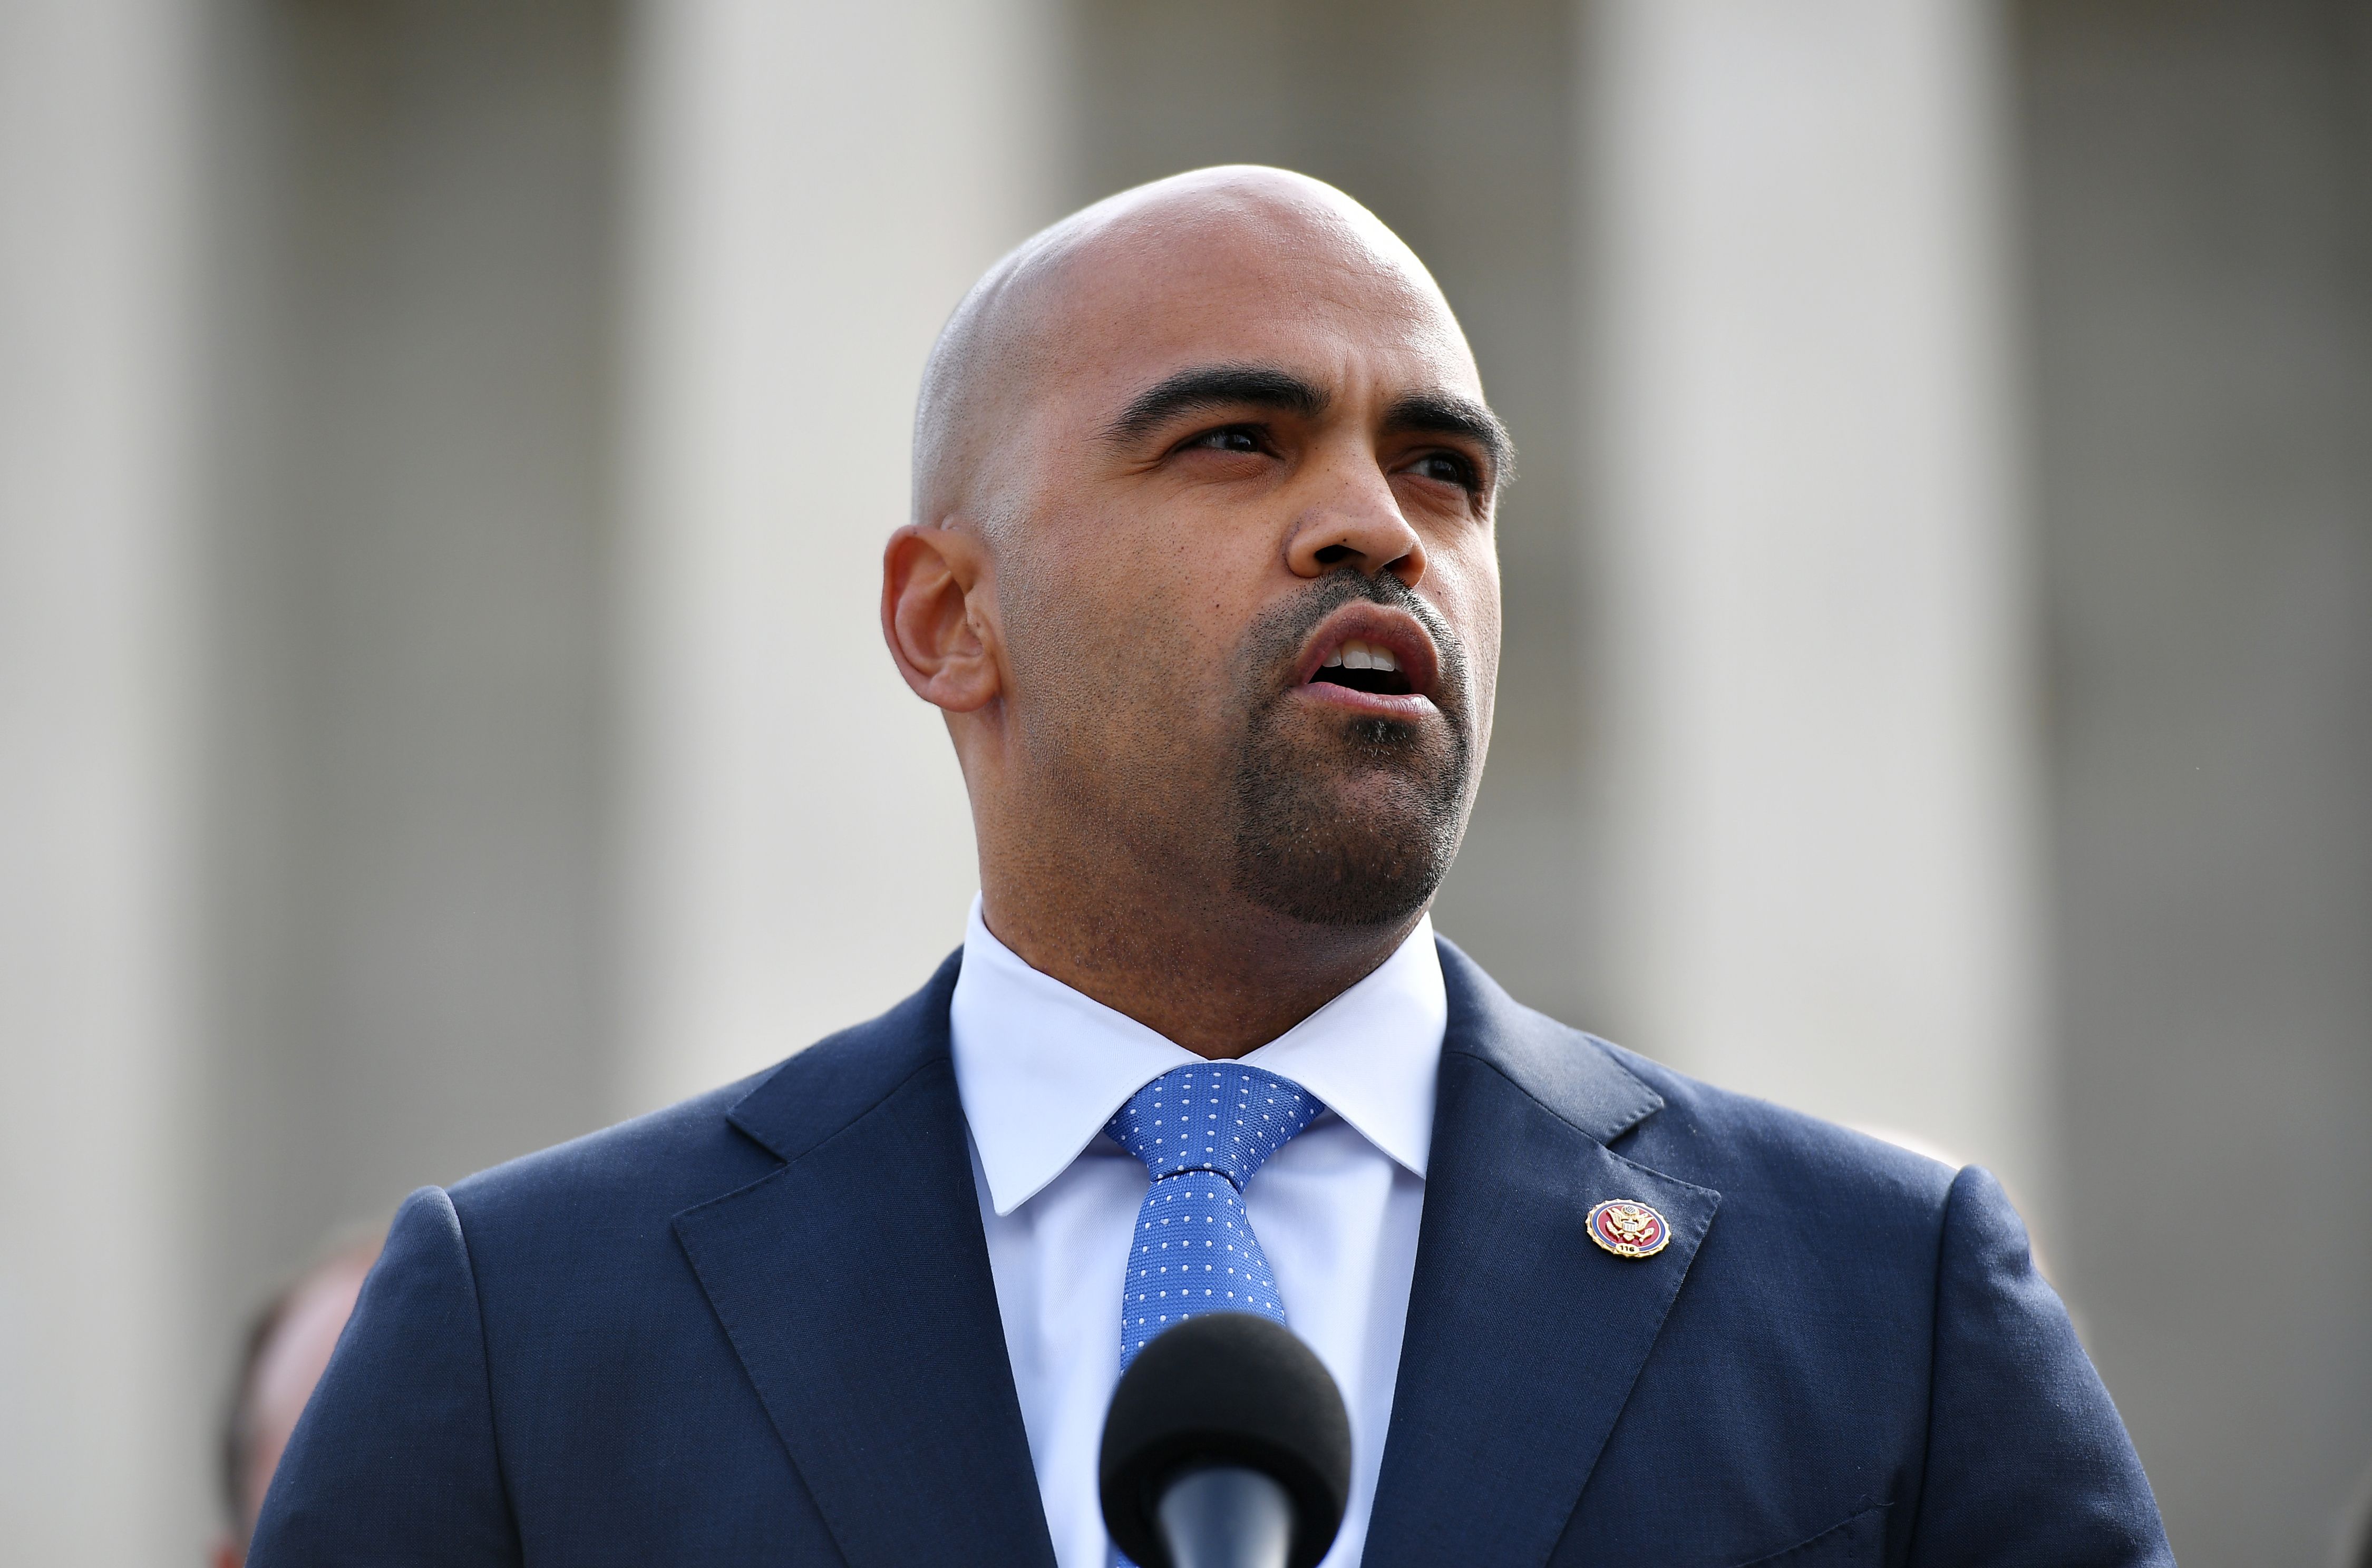 Representative Colin Allred, D-TX, speaks in front of the US Supreme Court during an event to call for the protection of affordable healthcare for those with preexisting conditions in Washington, DC on April 2, 2019. (Photo by MANDEL NGAN / AFP) (Photo by MANDEL NGAN/AFP via Getty Images)